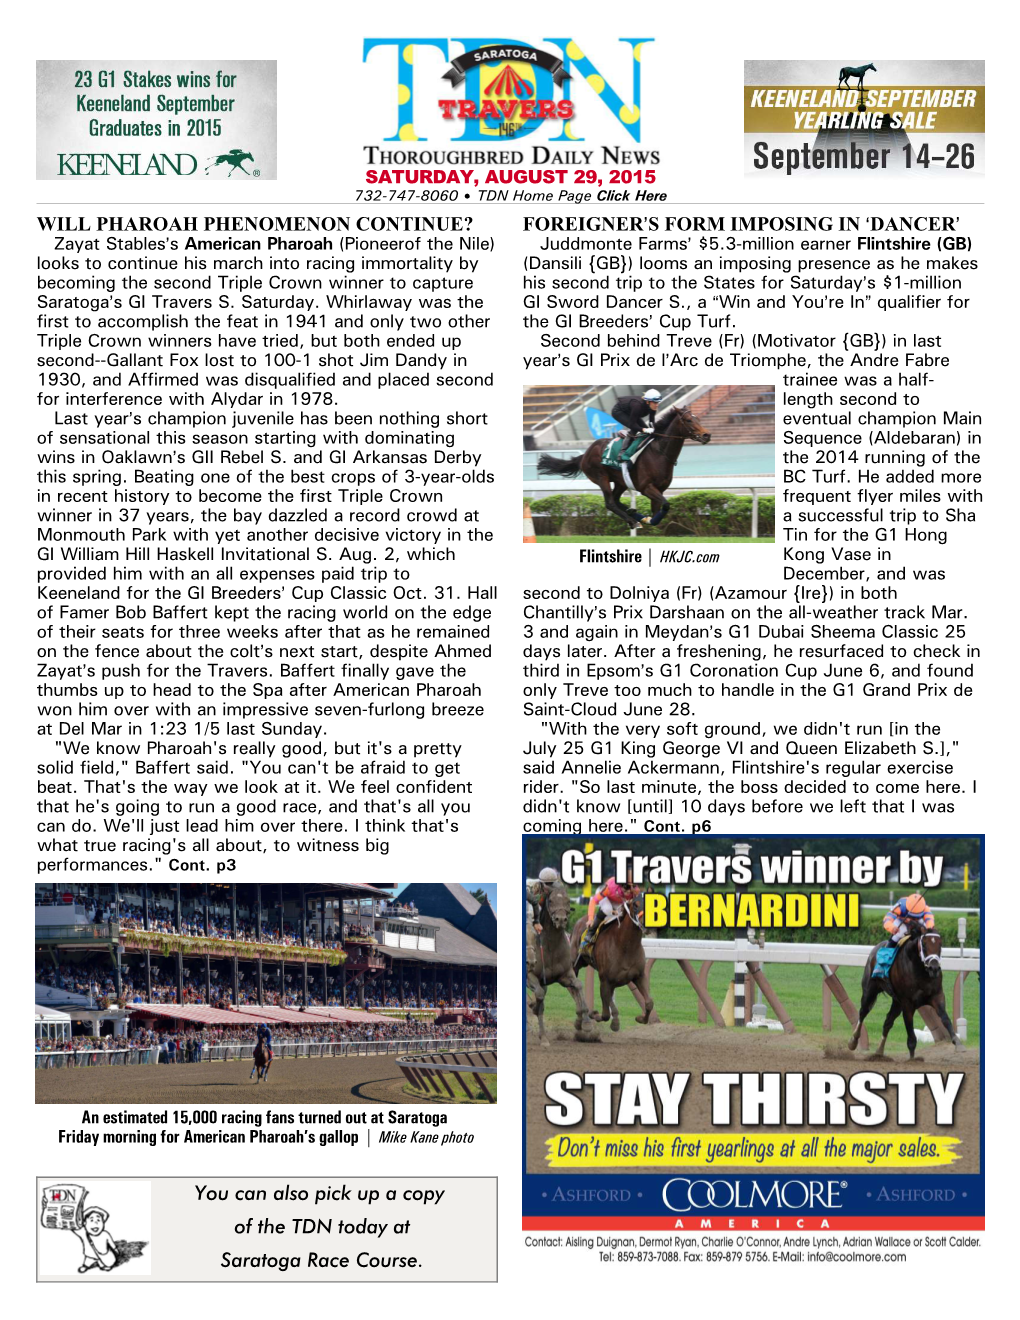 You Can Also Pick up a Copy of the TDN Today at Saratoga Race Course